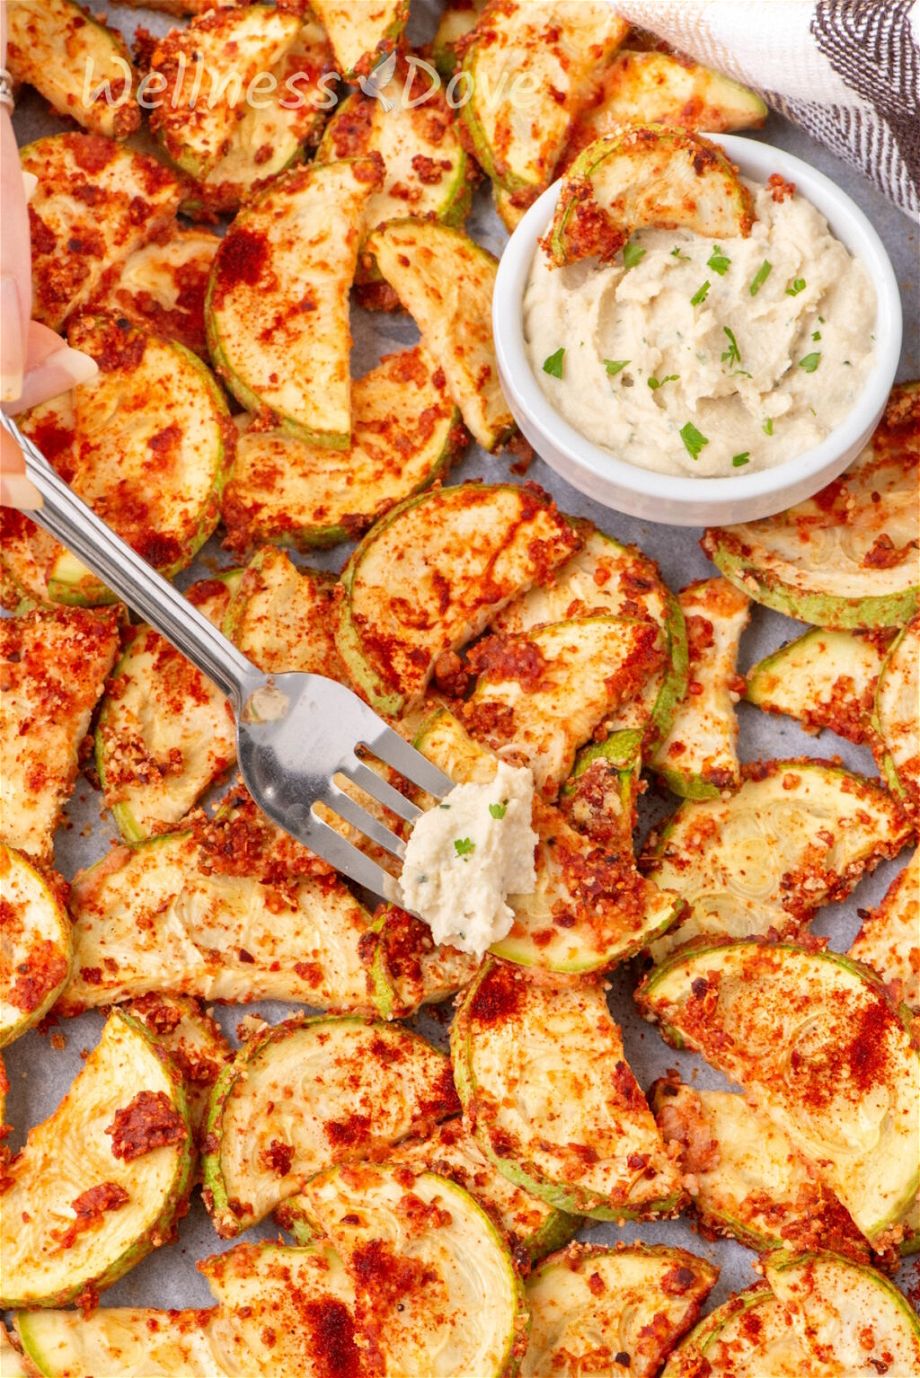 a close up photo of the Easy Oil-free Vegan Baked Zucchini in a baking tray while a fork is taking a zucchini out